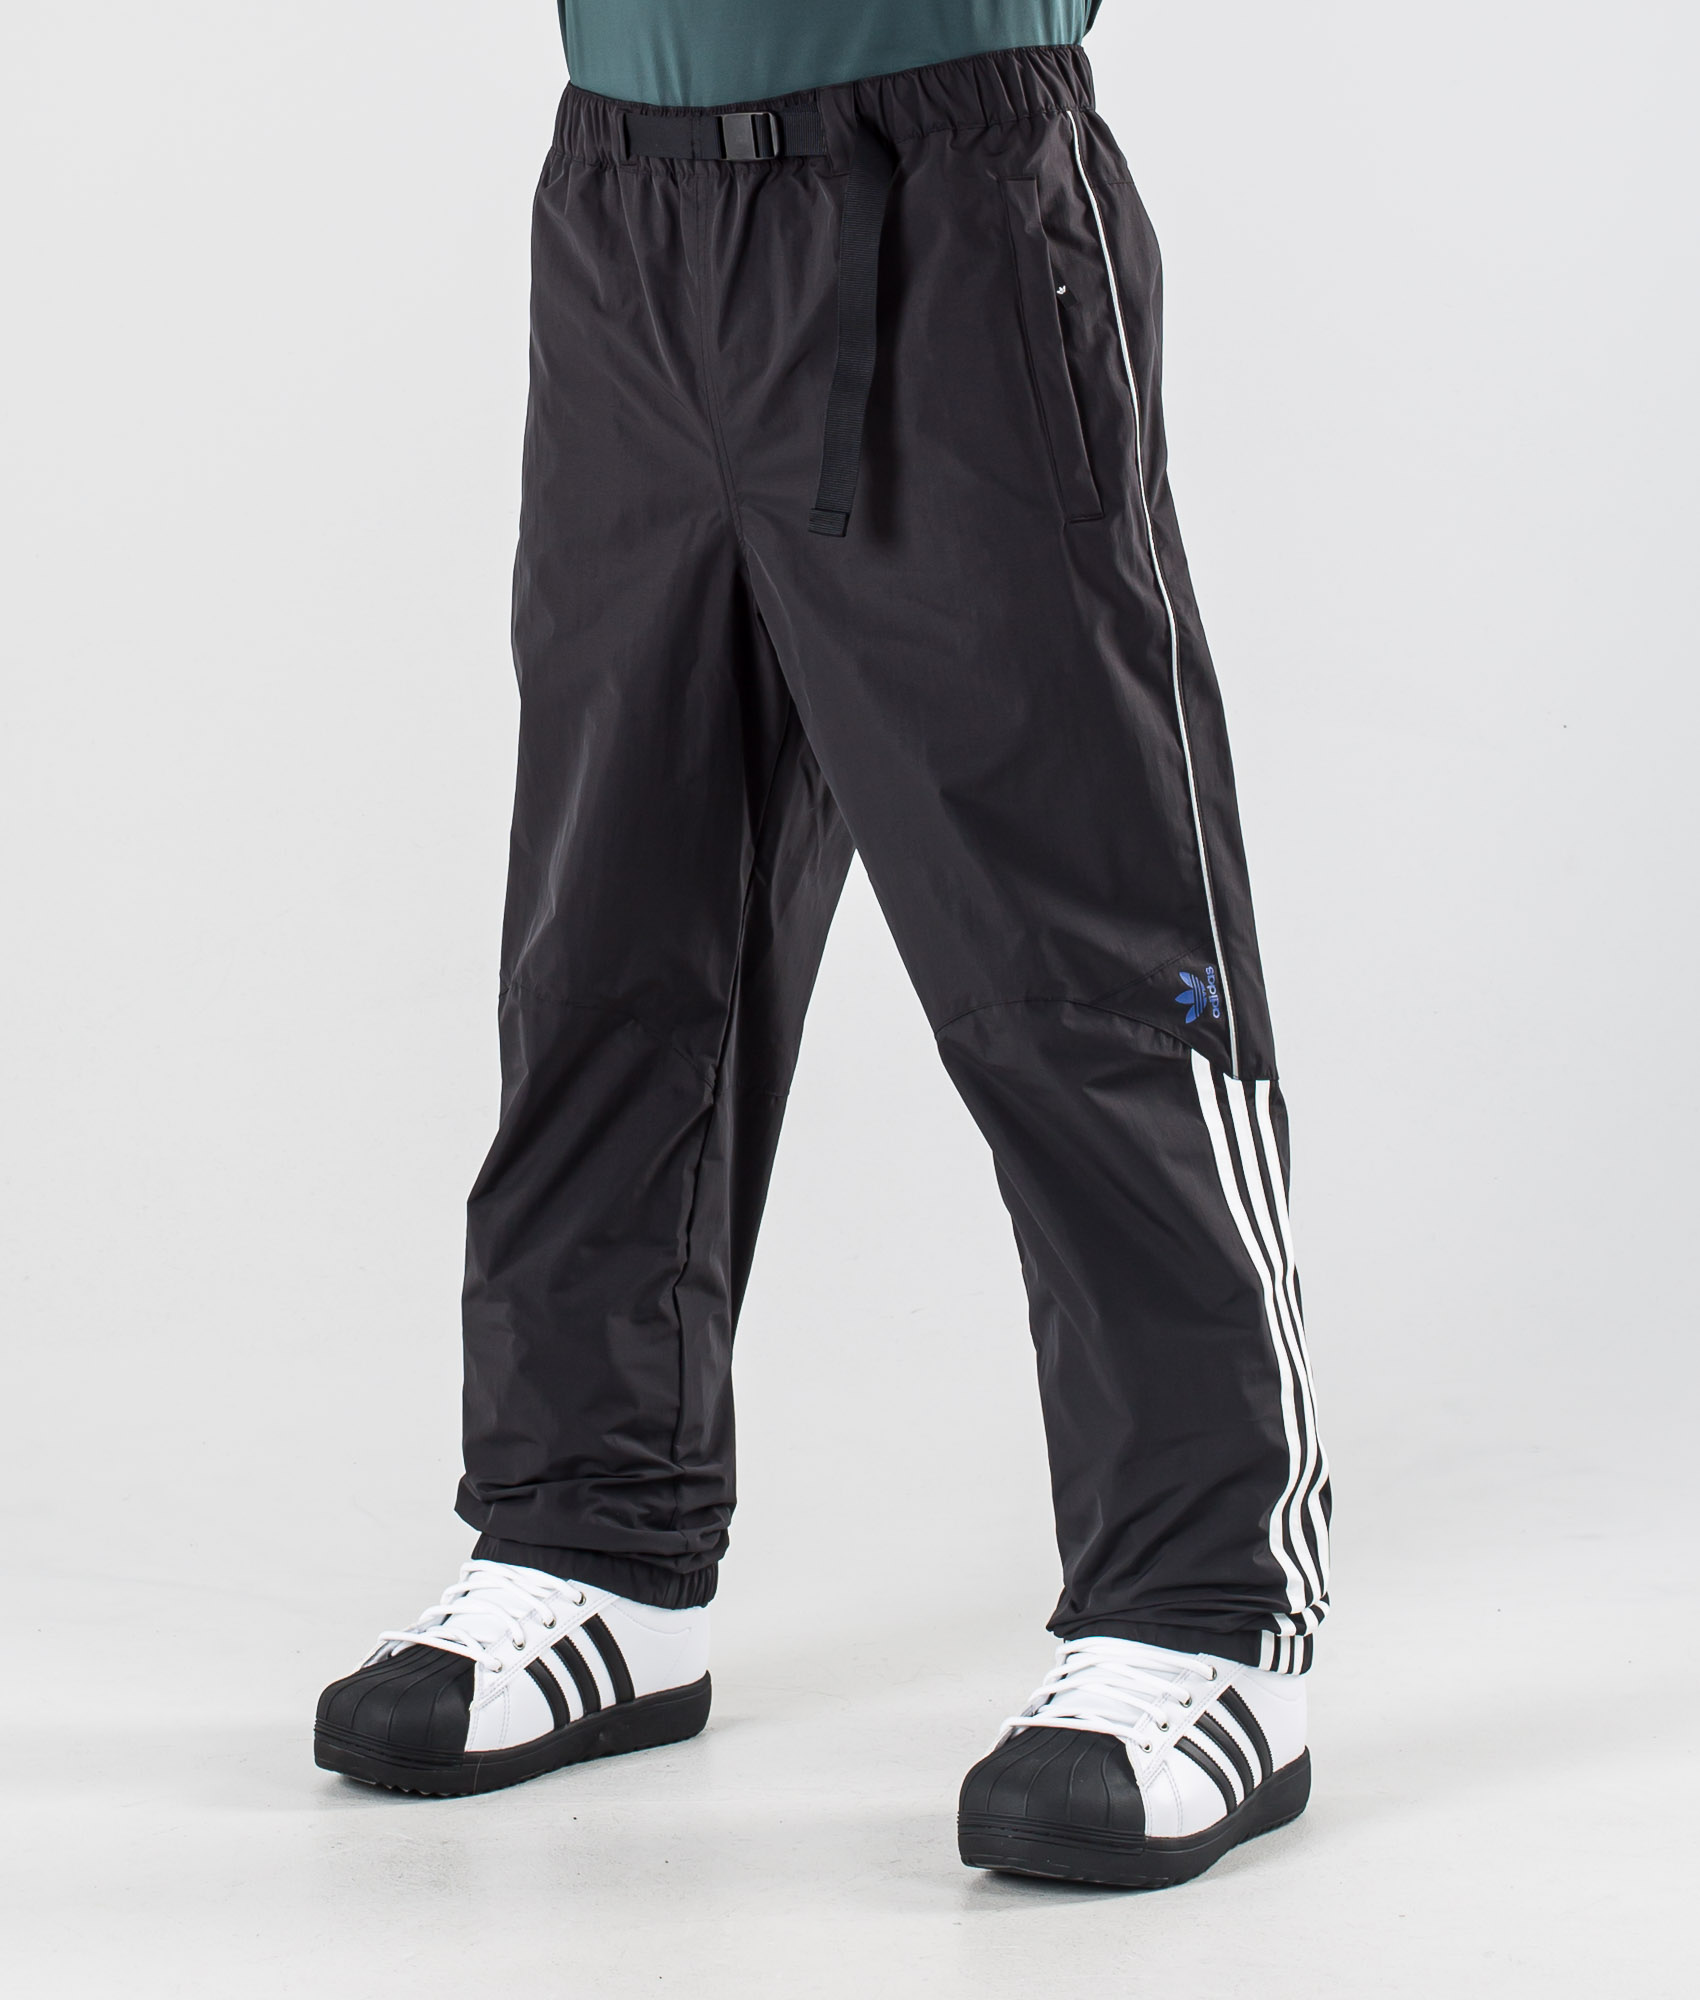 Adidas Mobility Pantalones Snowboard Hombre Ink/White - |